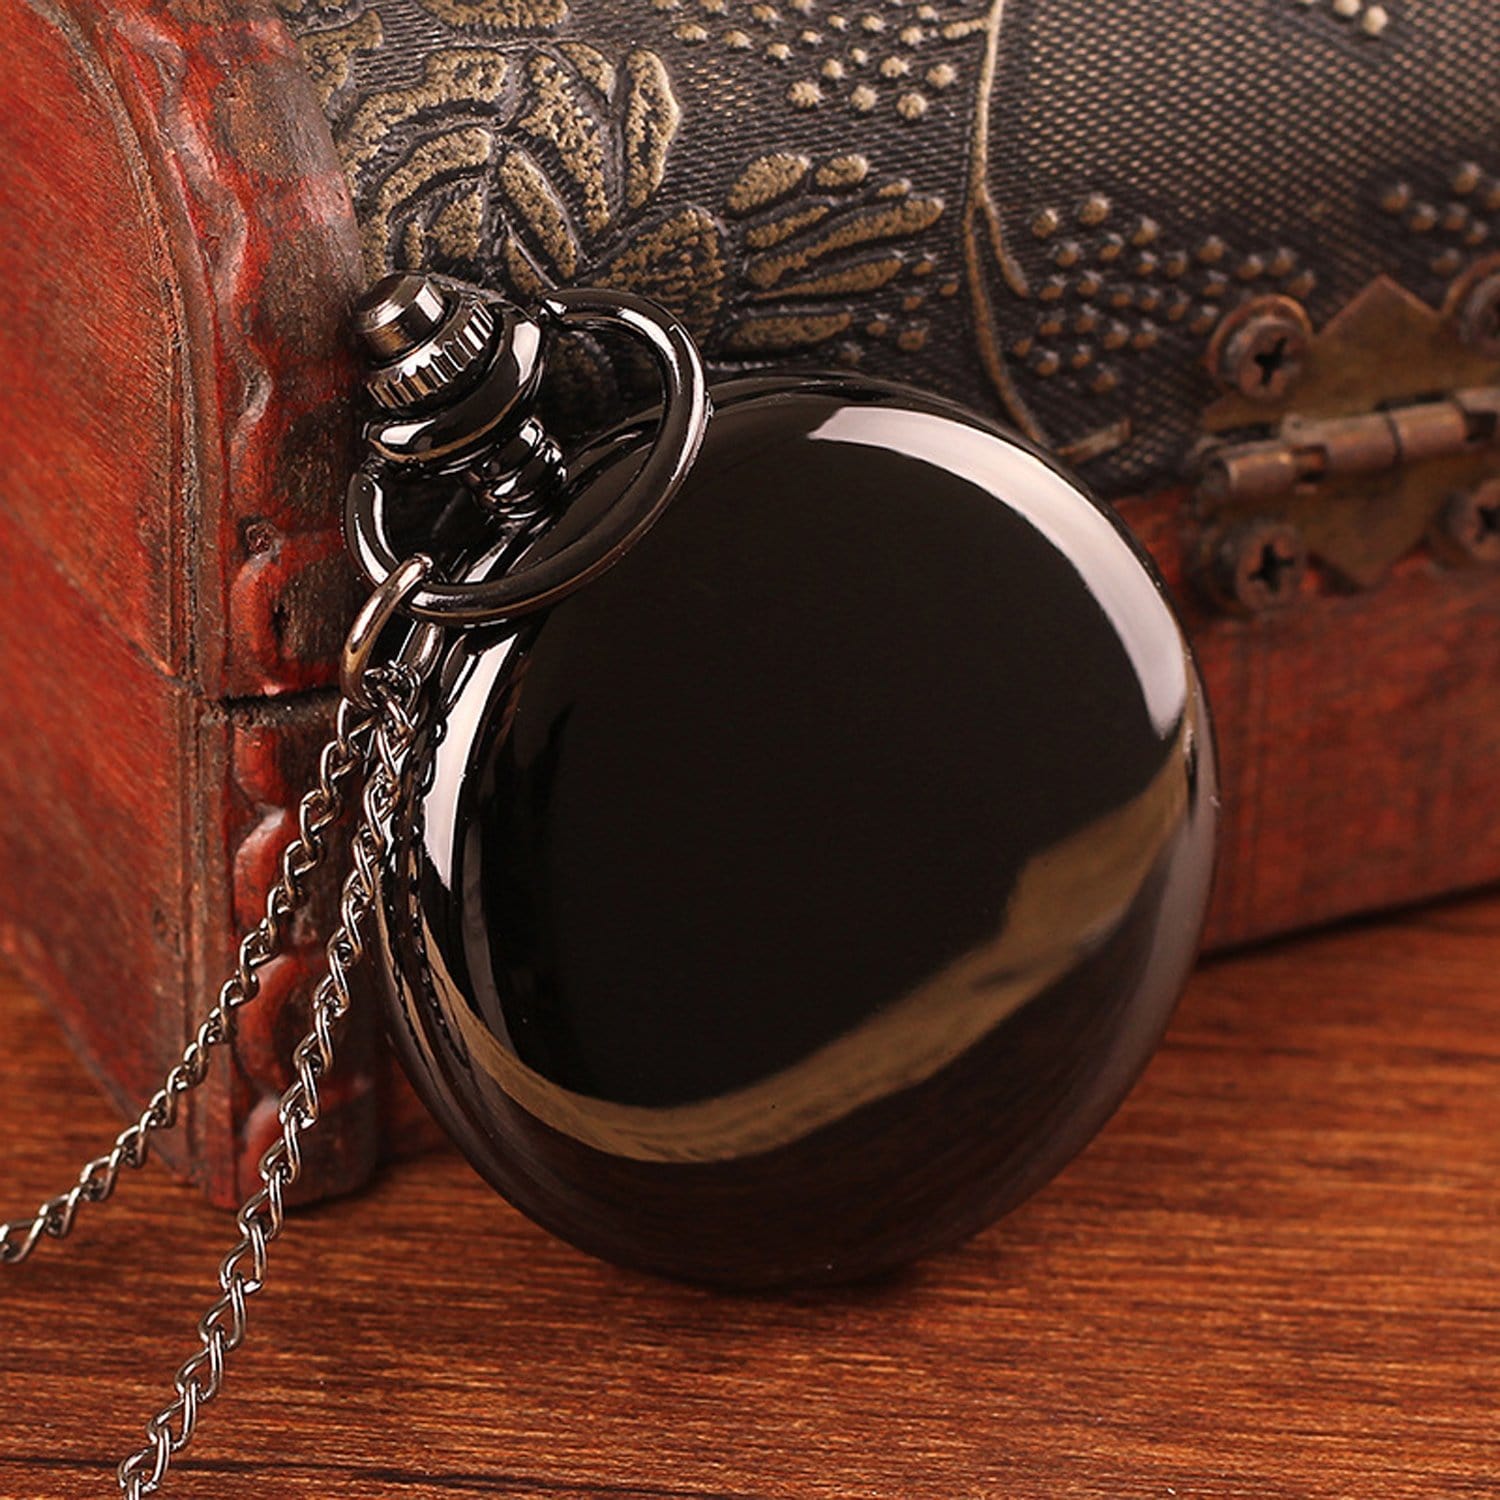 Pocket Watches To My Boyfriend - I Believe In Your Love Pocket Watch GiveMe-Gifts